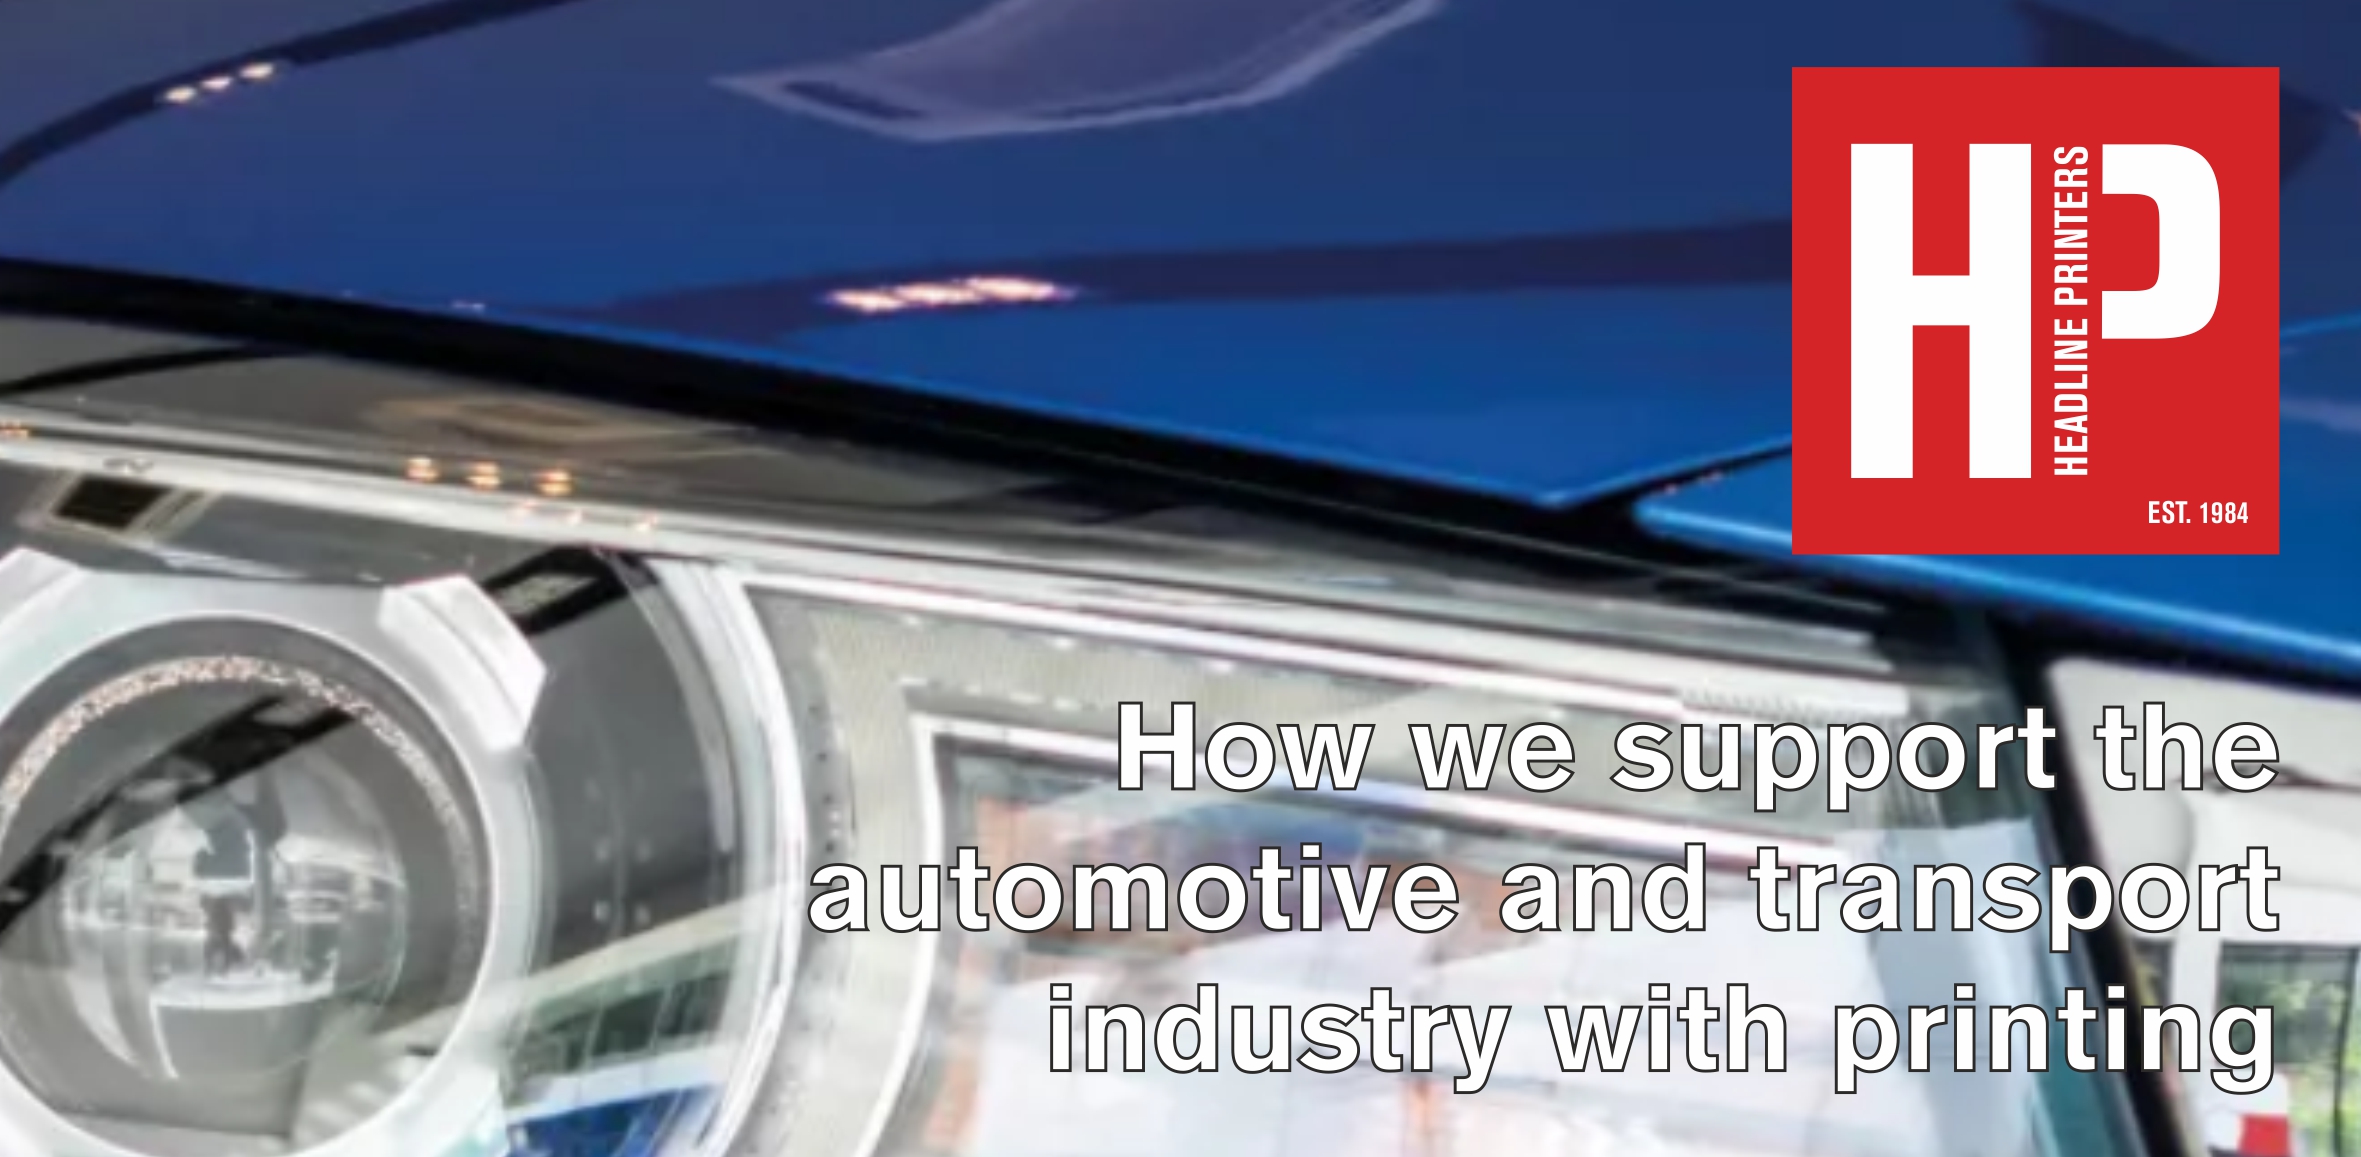 How we support the automotive and transport industry with printing